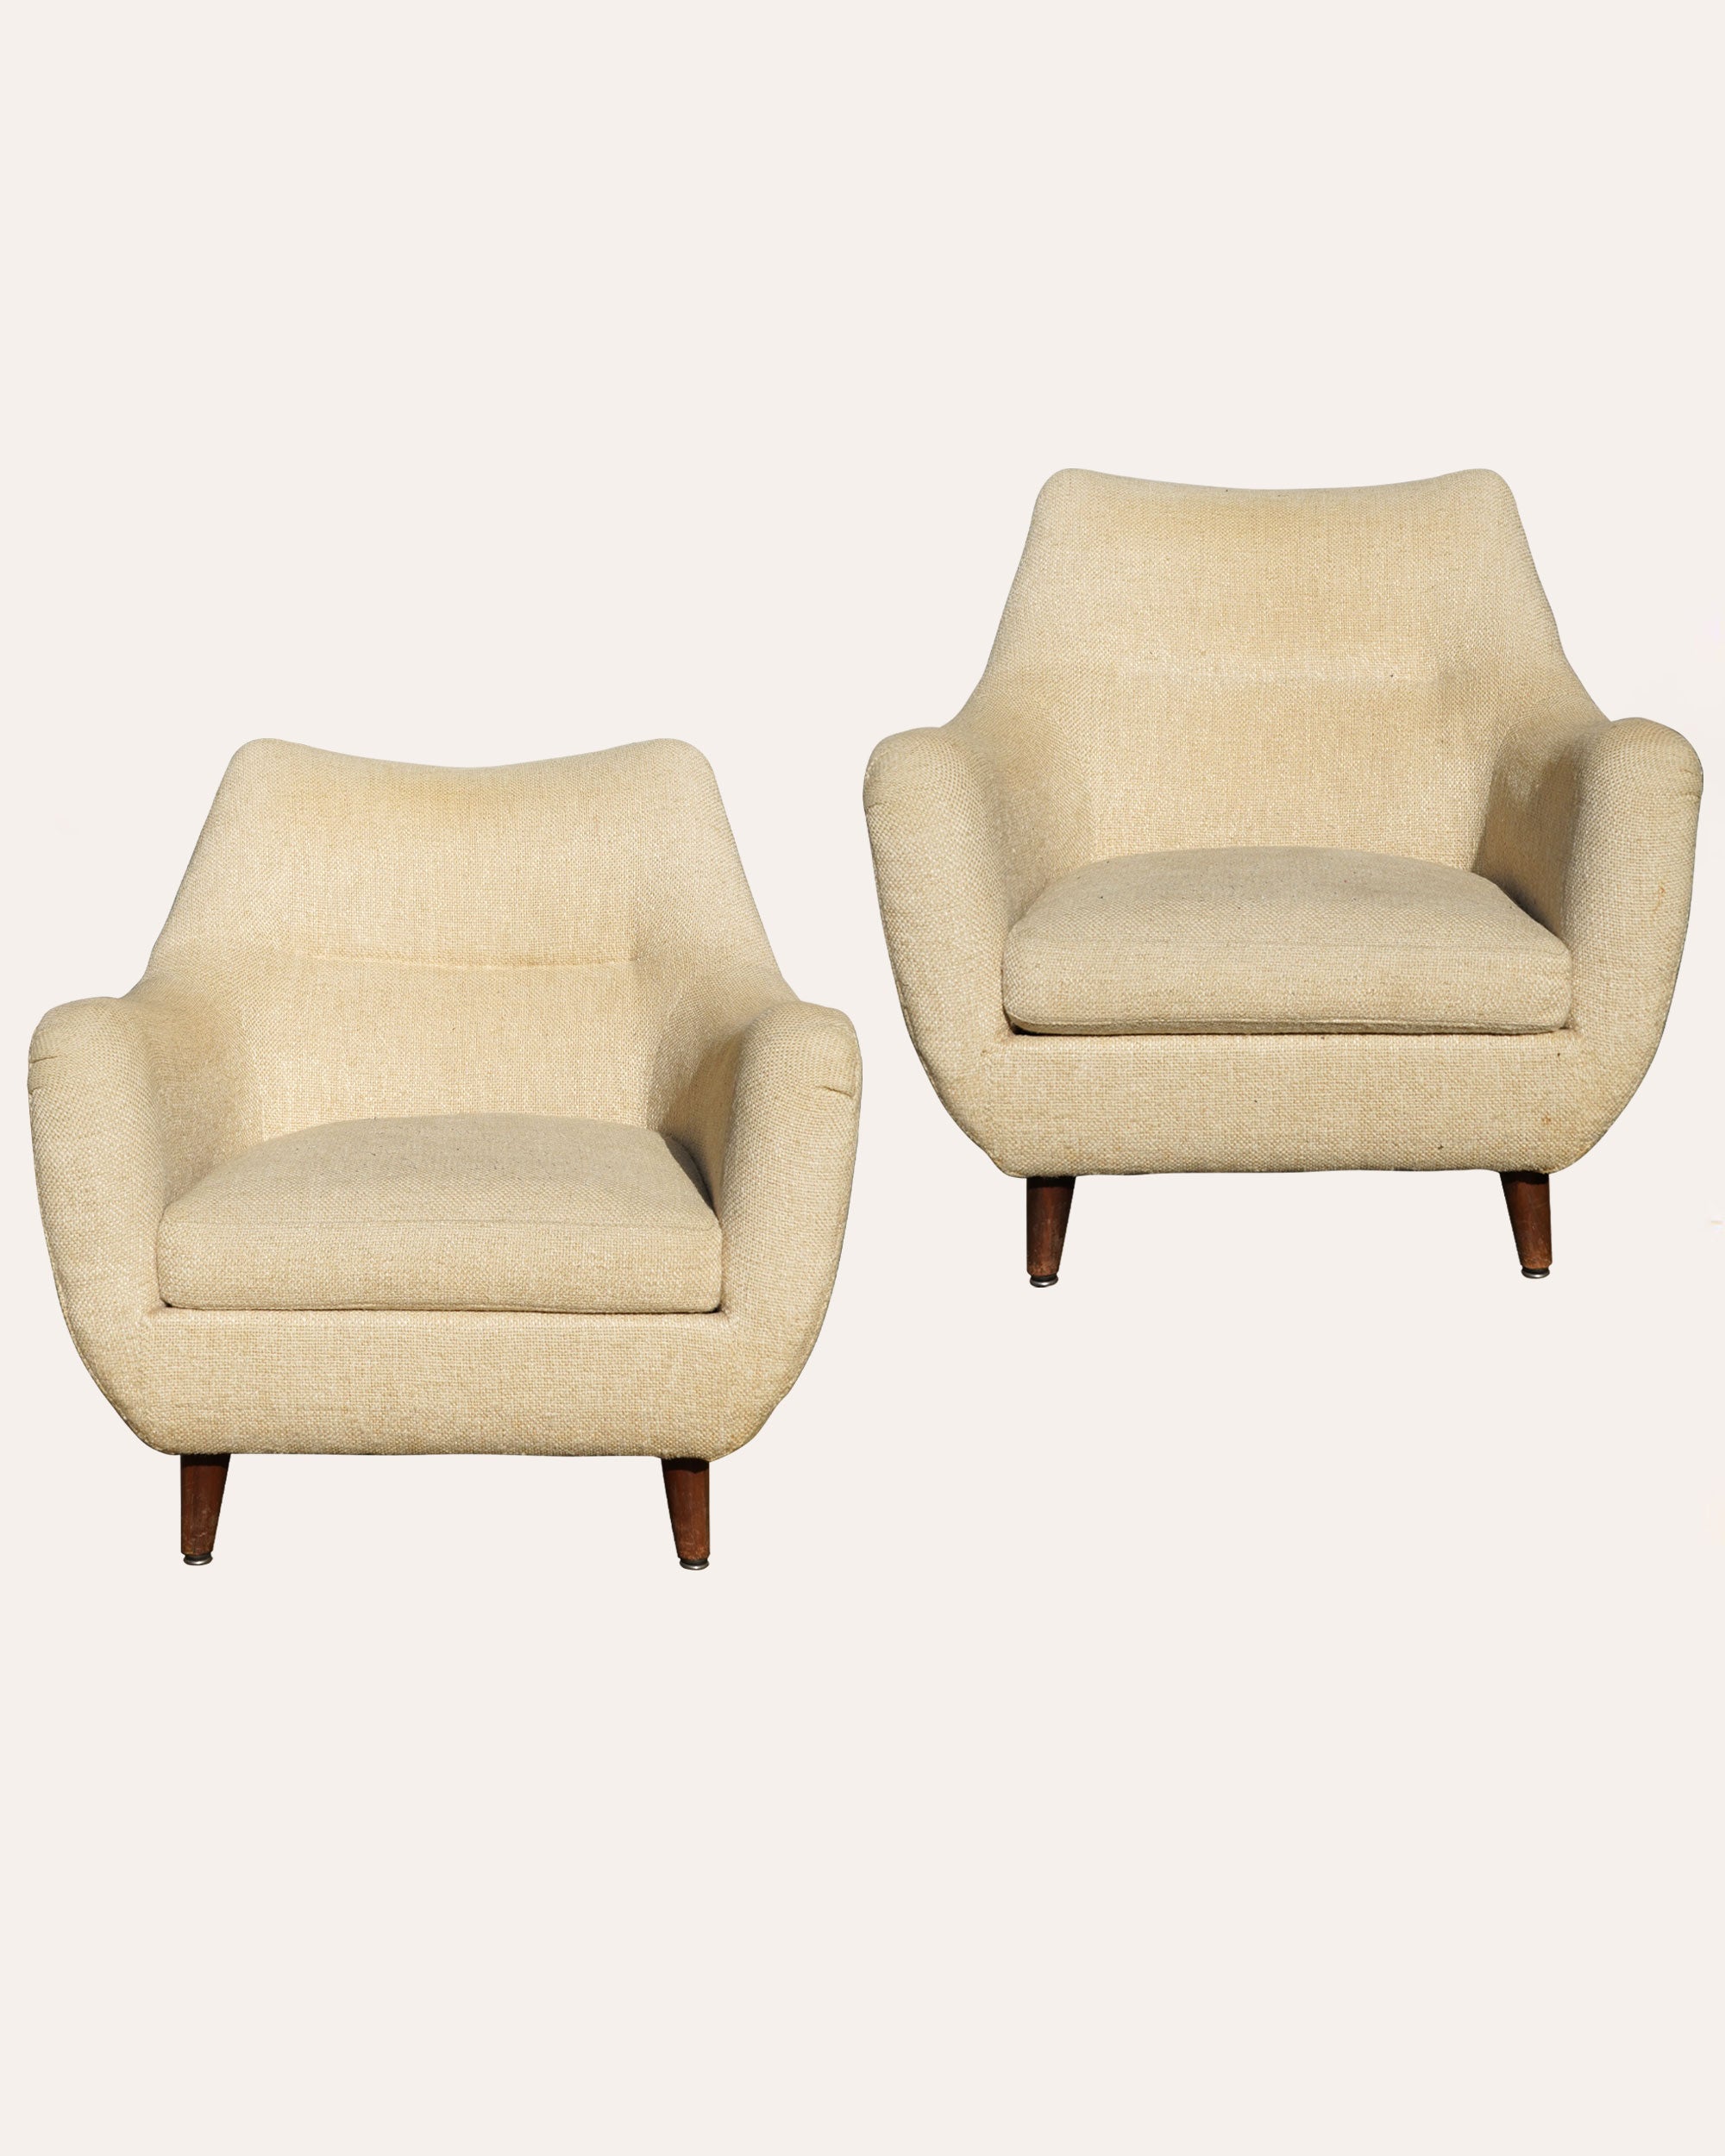 Pair of Danish 1970's armchairs in original upholstery  RESERVED